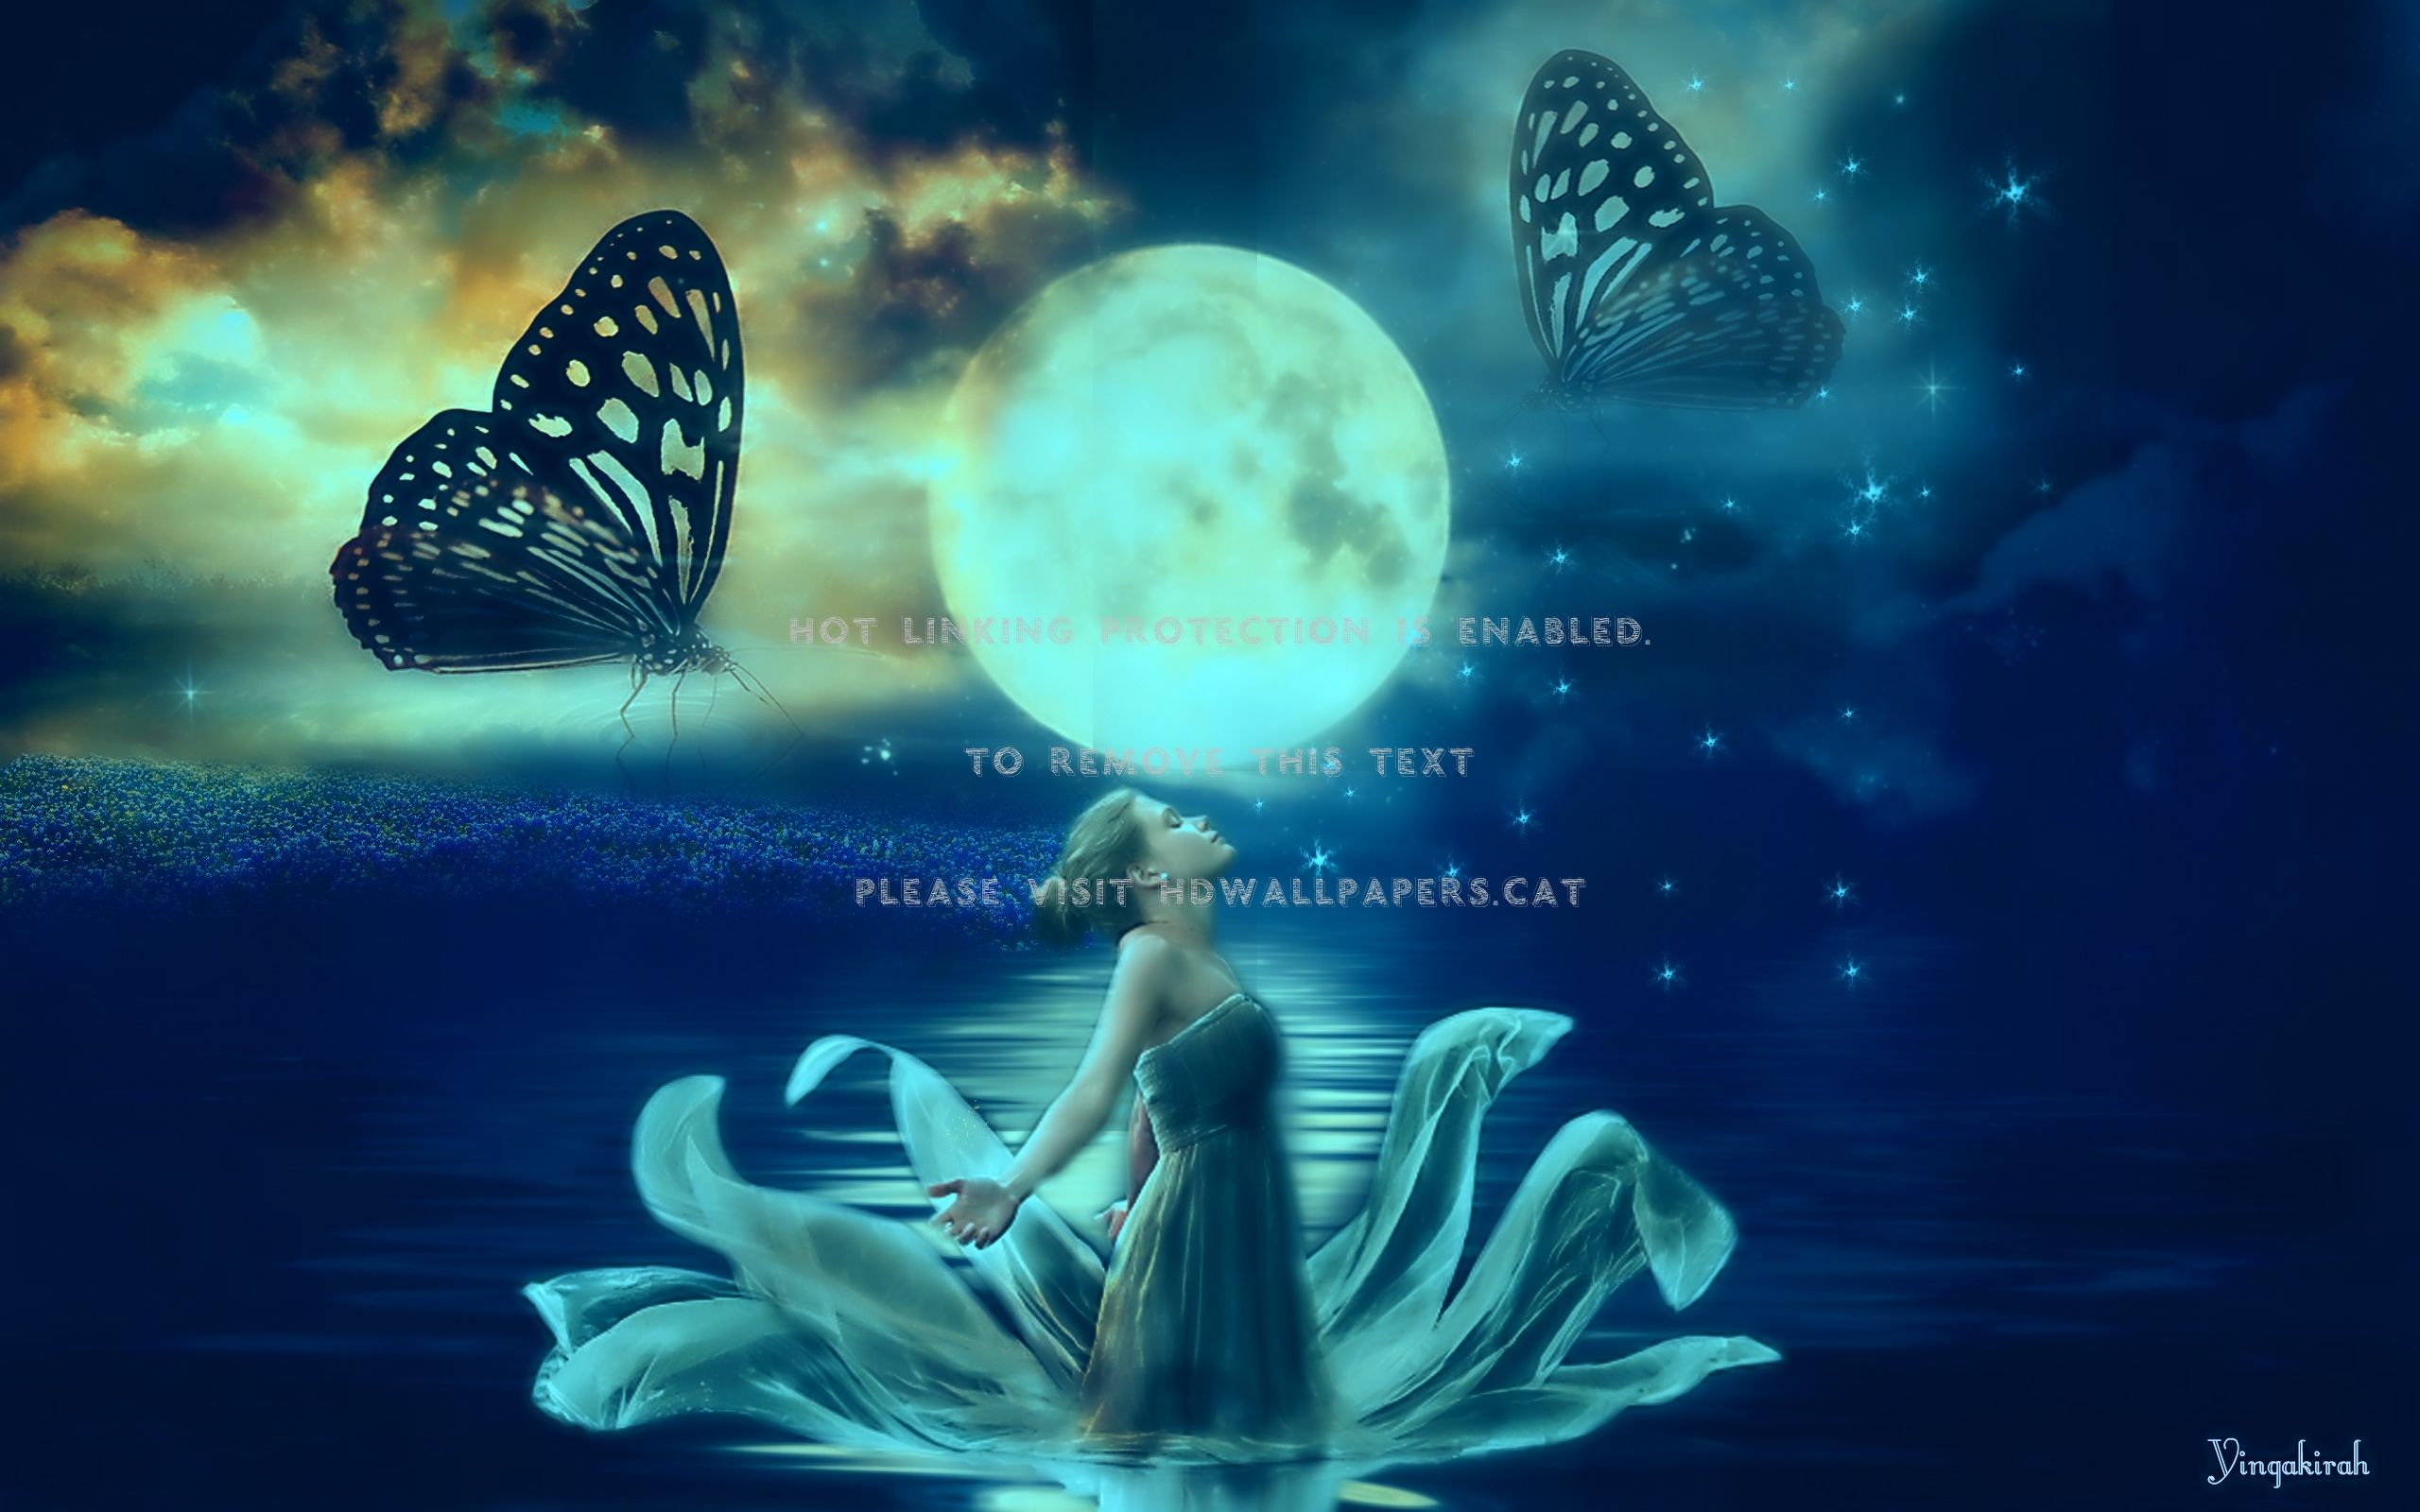 Fantasy Mask Women With Butterfly And Birds In Night
 Wallpapers